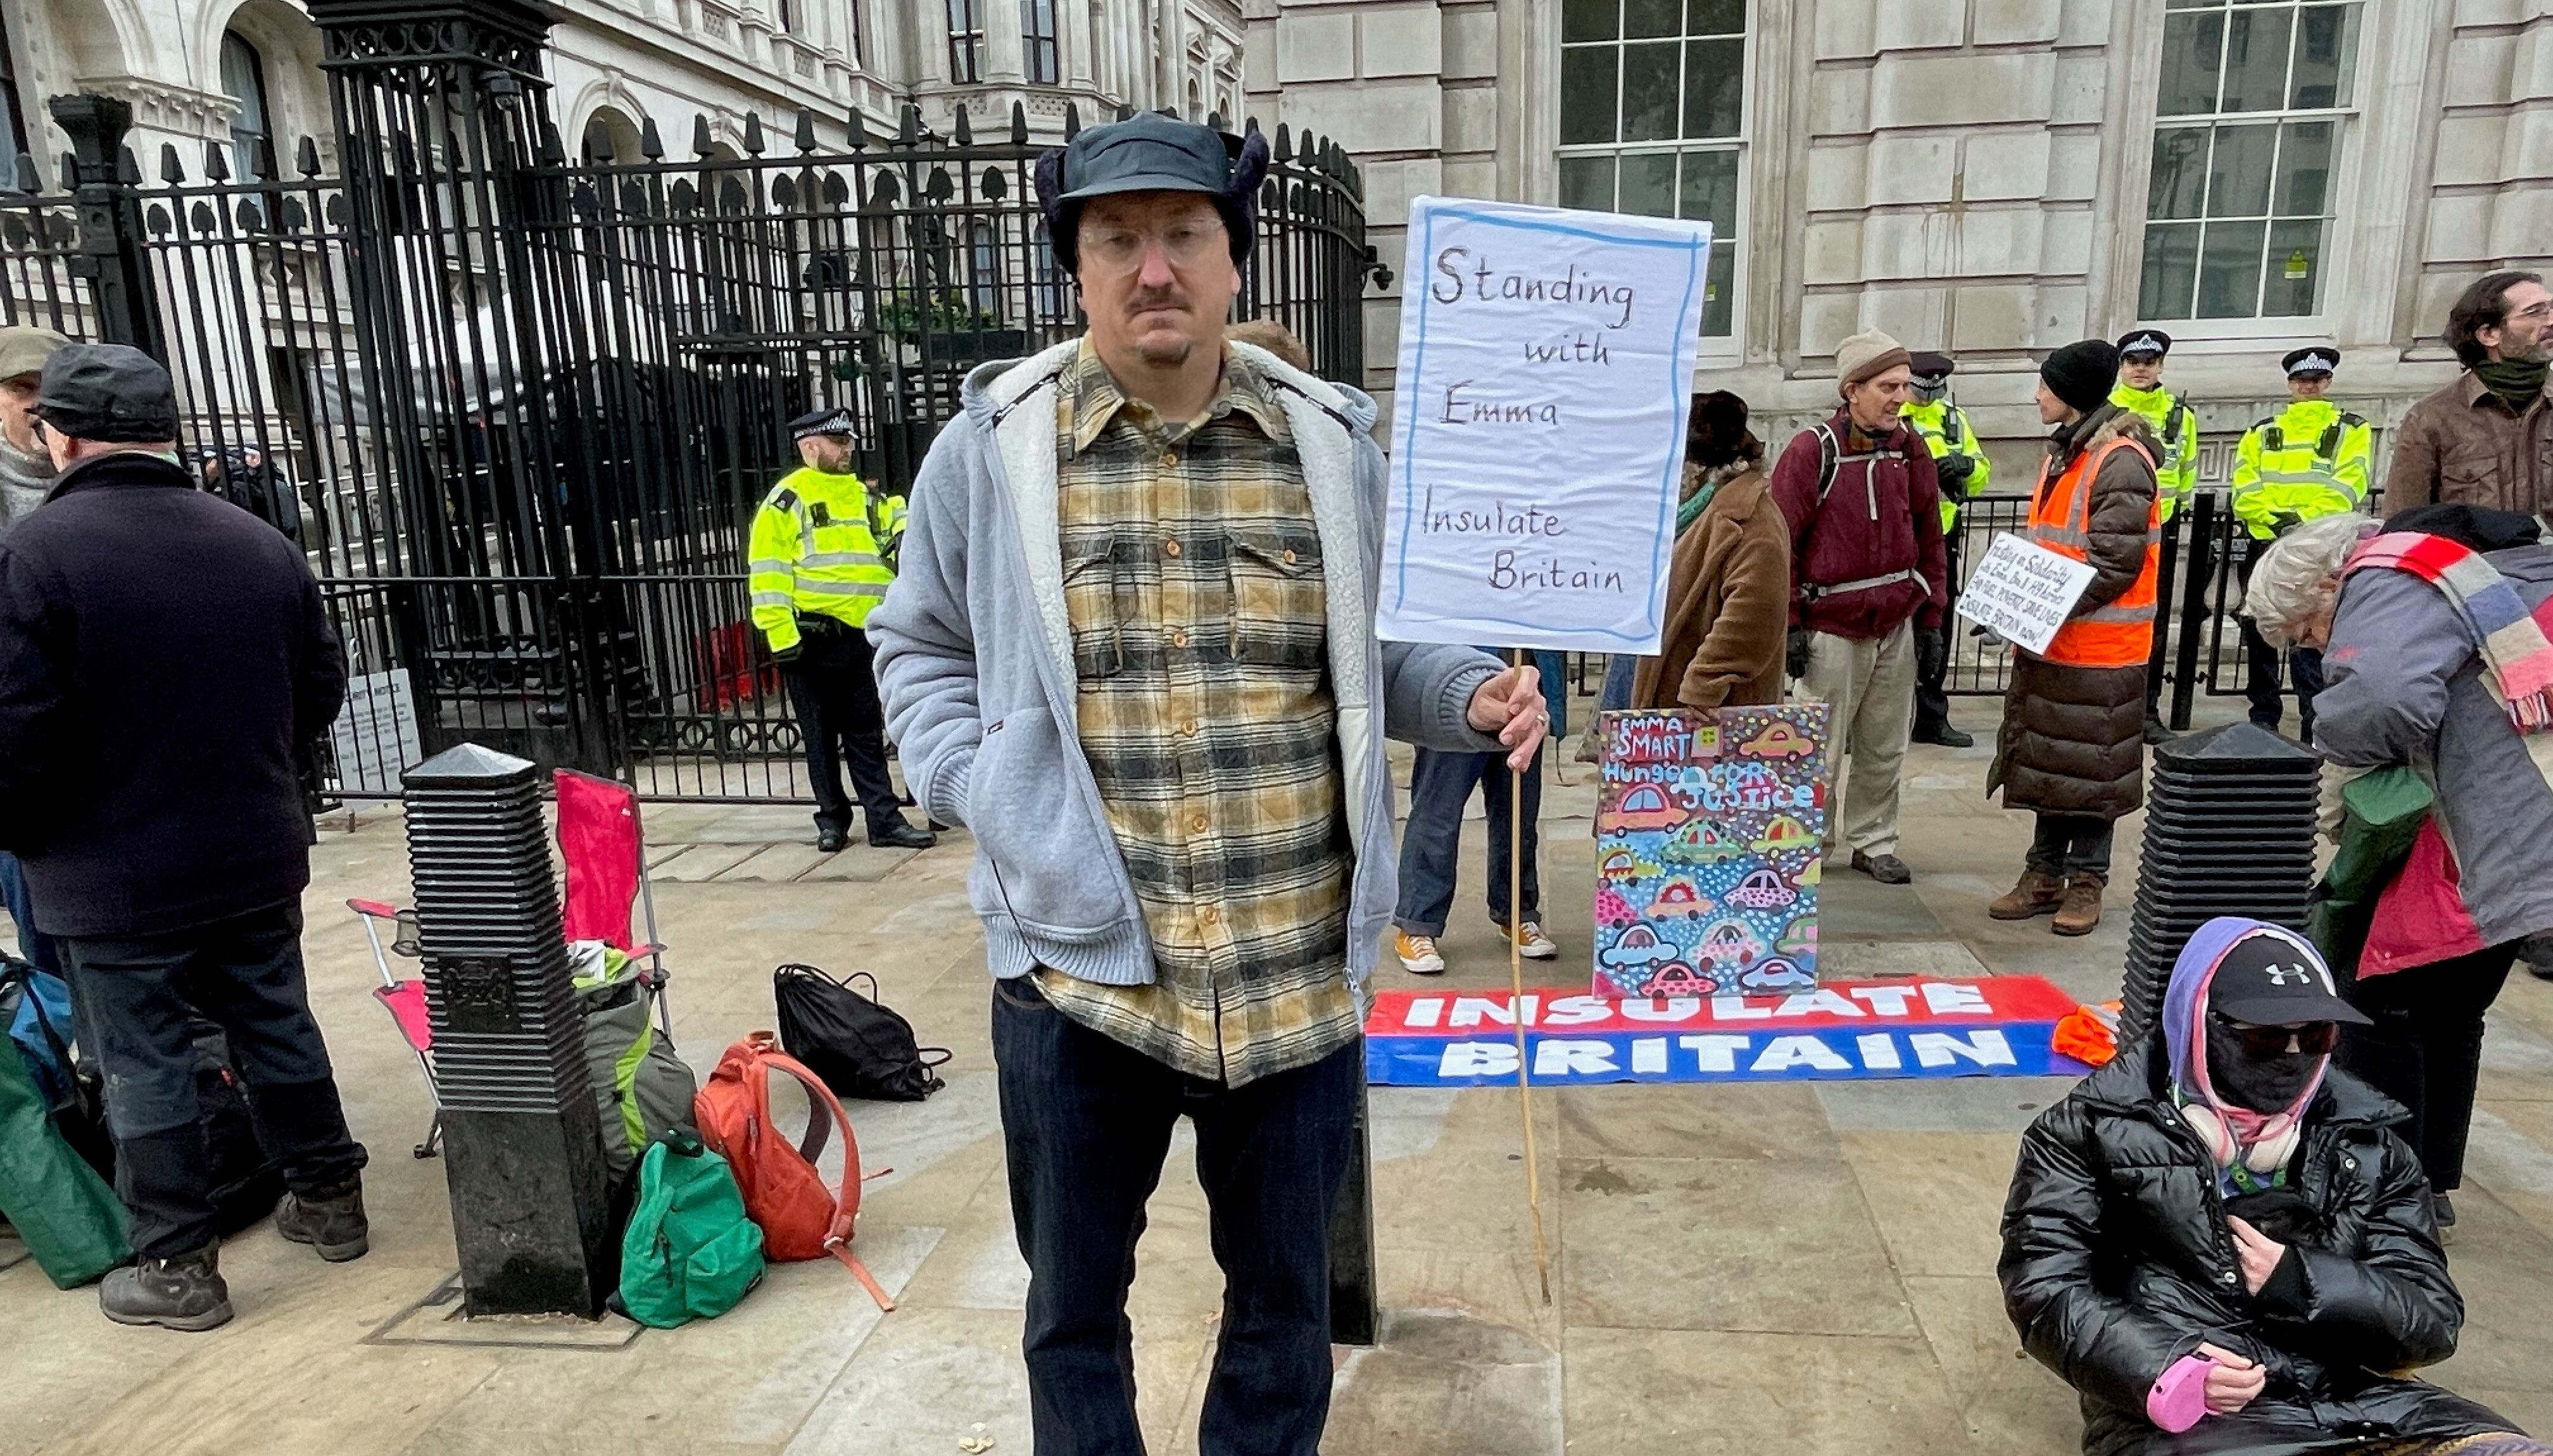 Andy Smith who is fasting in solidarity with his wife, Emma Smart, who is on hunger strike in prison, with supporters of Insulate Britain staging a 24 hour fast outside Downing Street, London, in a call for action on fuel poverty. Picture date: Tuesday November 30, 2021.